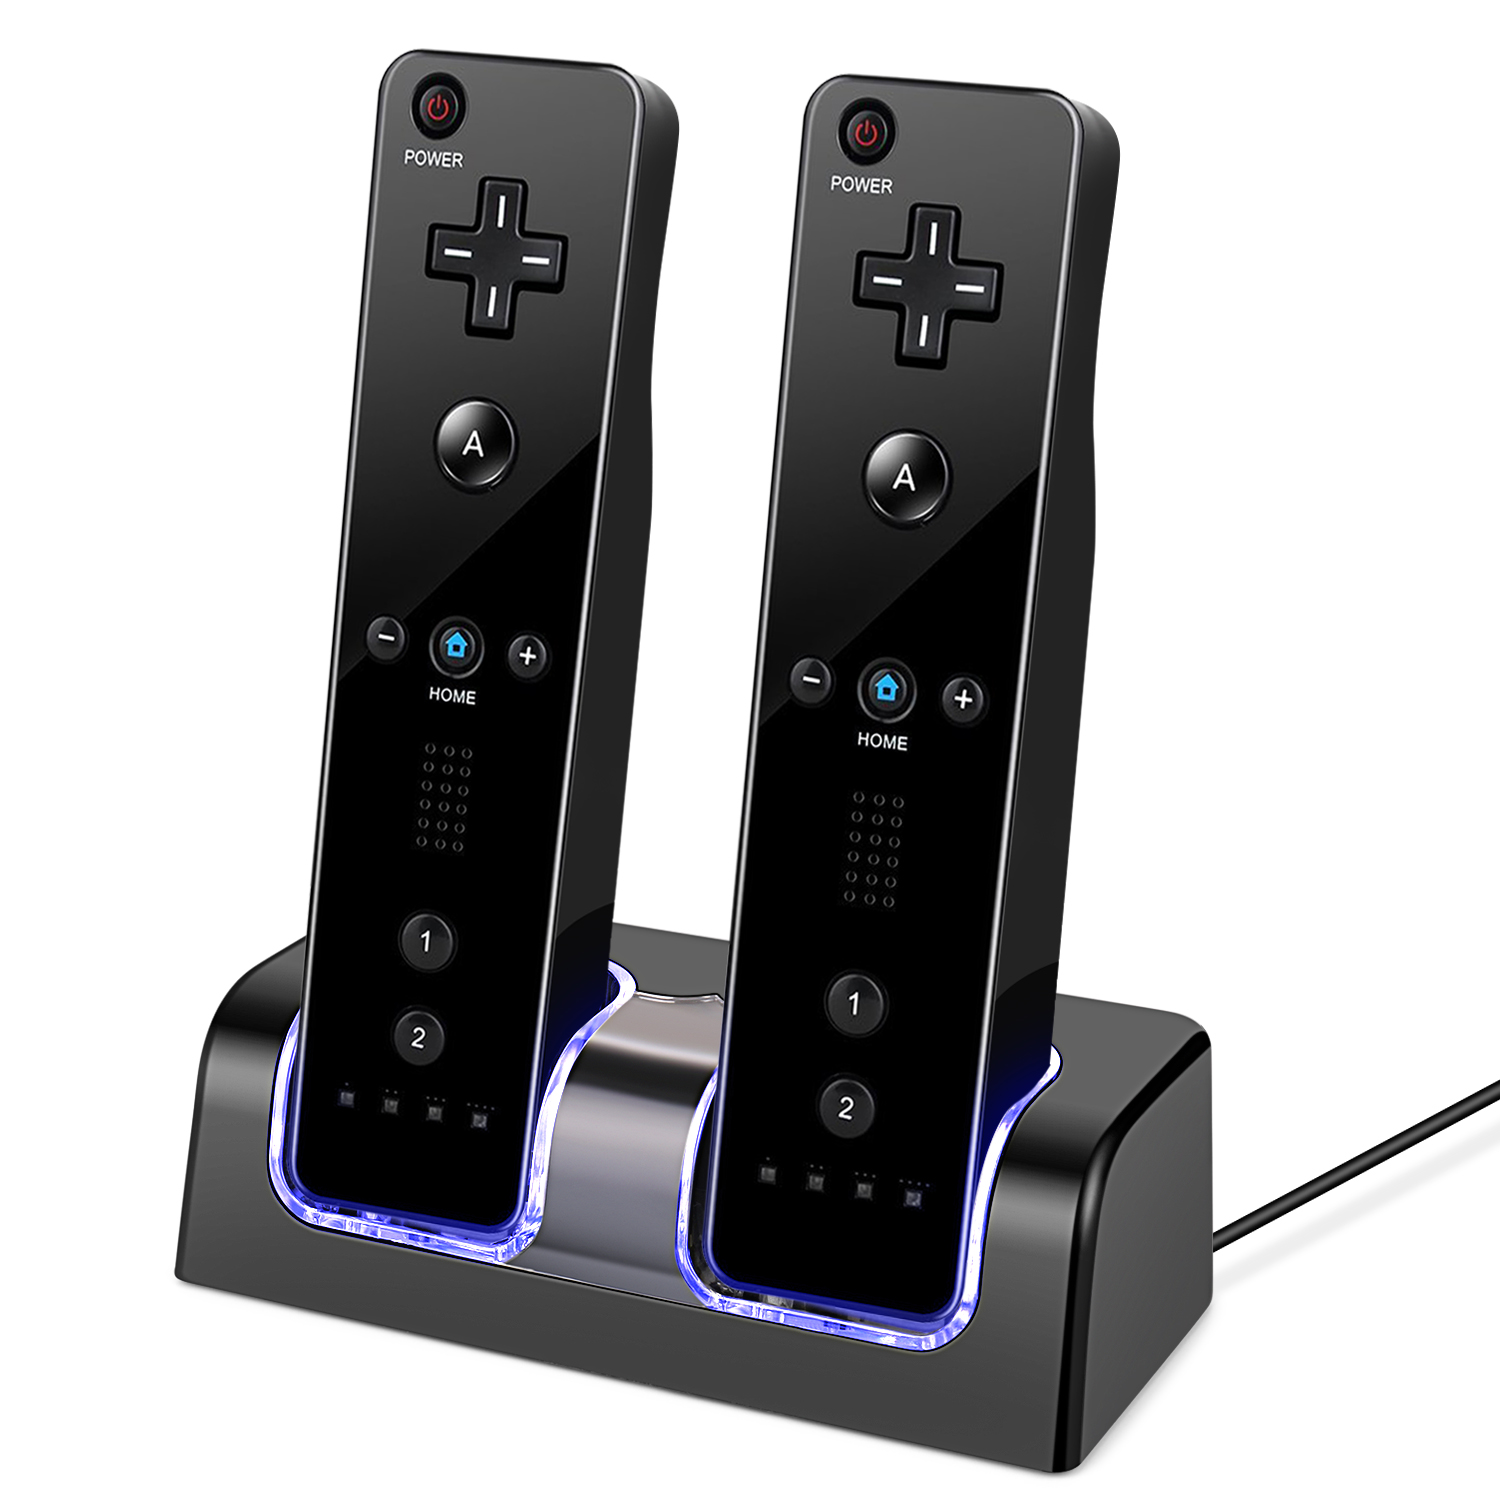 Wii Remote Charging Station - Dual Port Wiimote Controller Charger Pad Dock Cradle with 4 Rechargeable Batteries & LED Light for Nintendo Wii Gaming Console Control (Black)